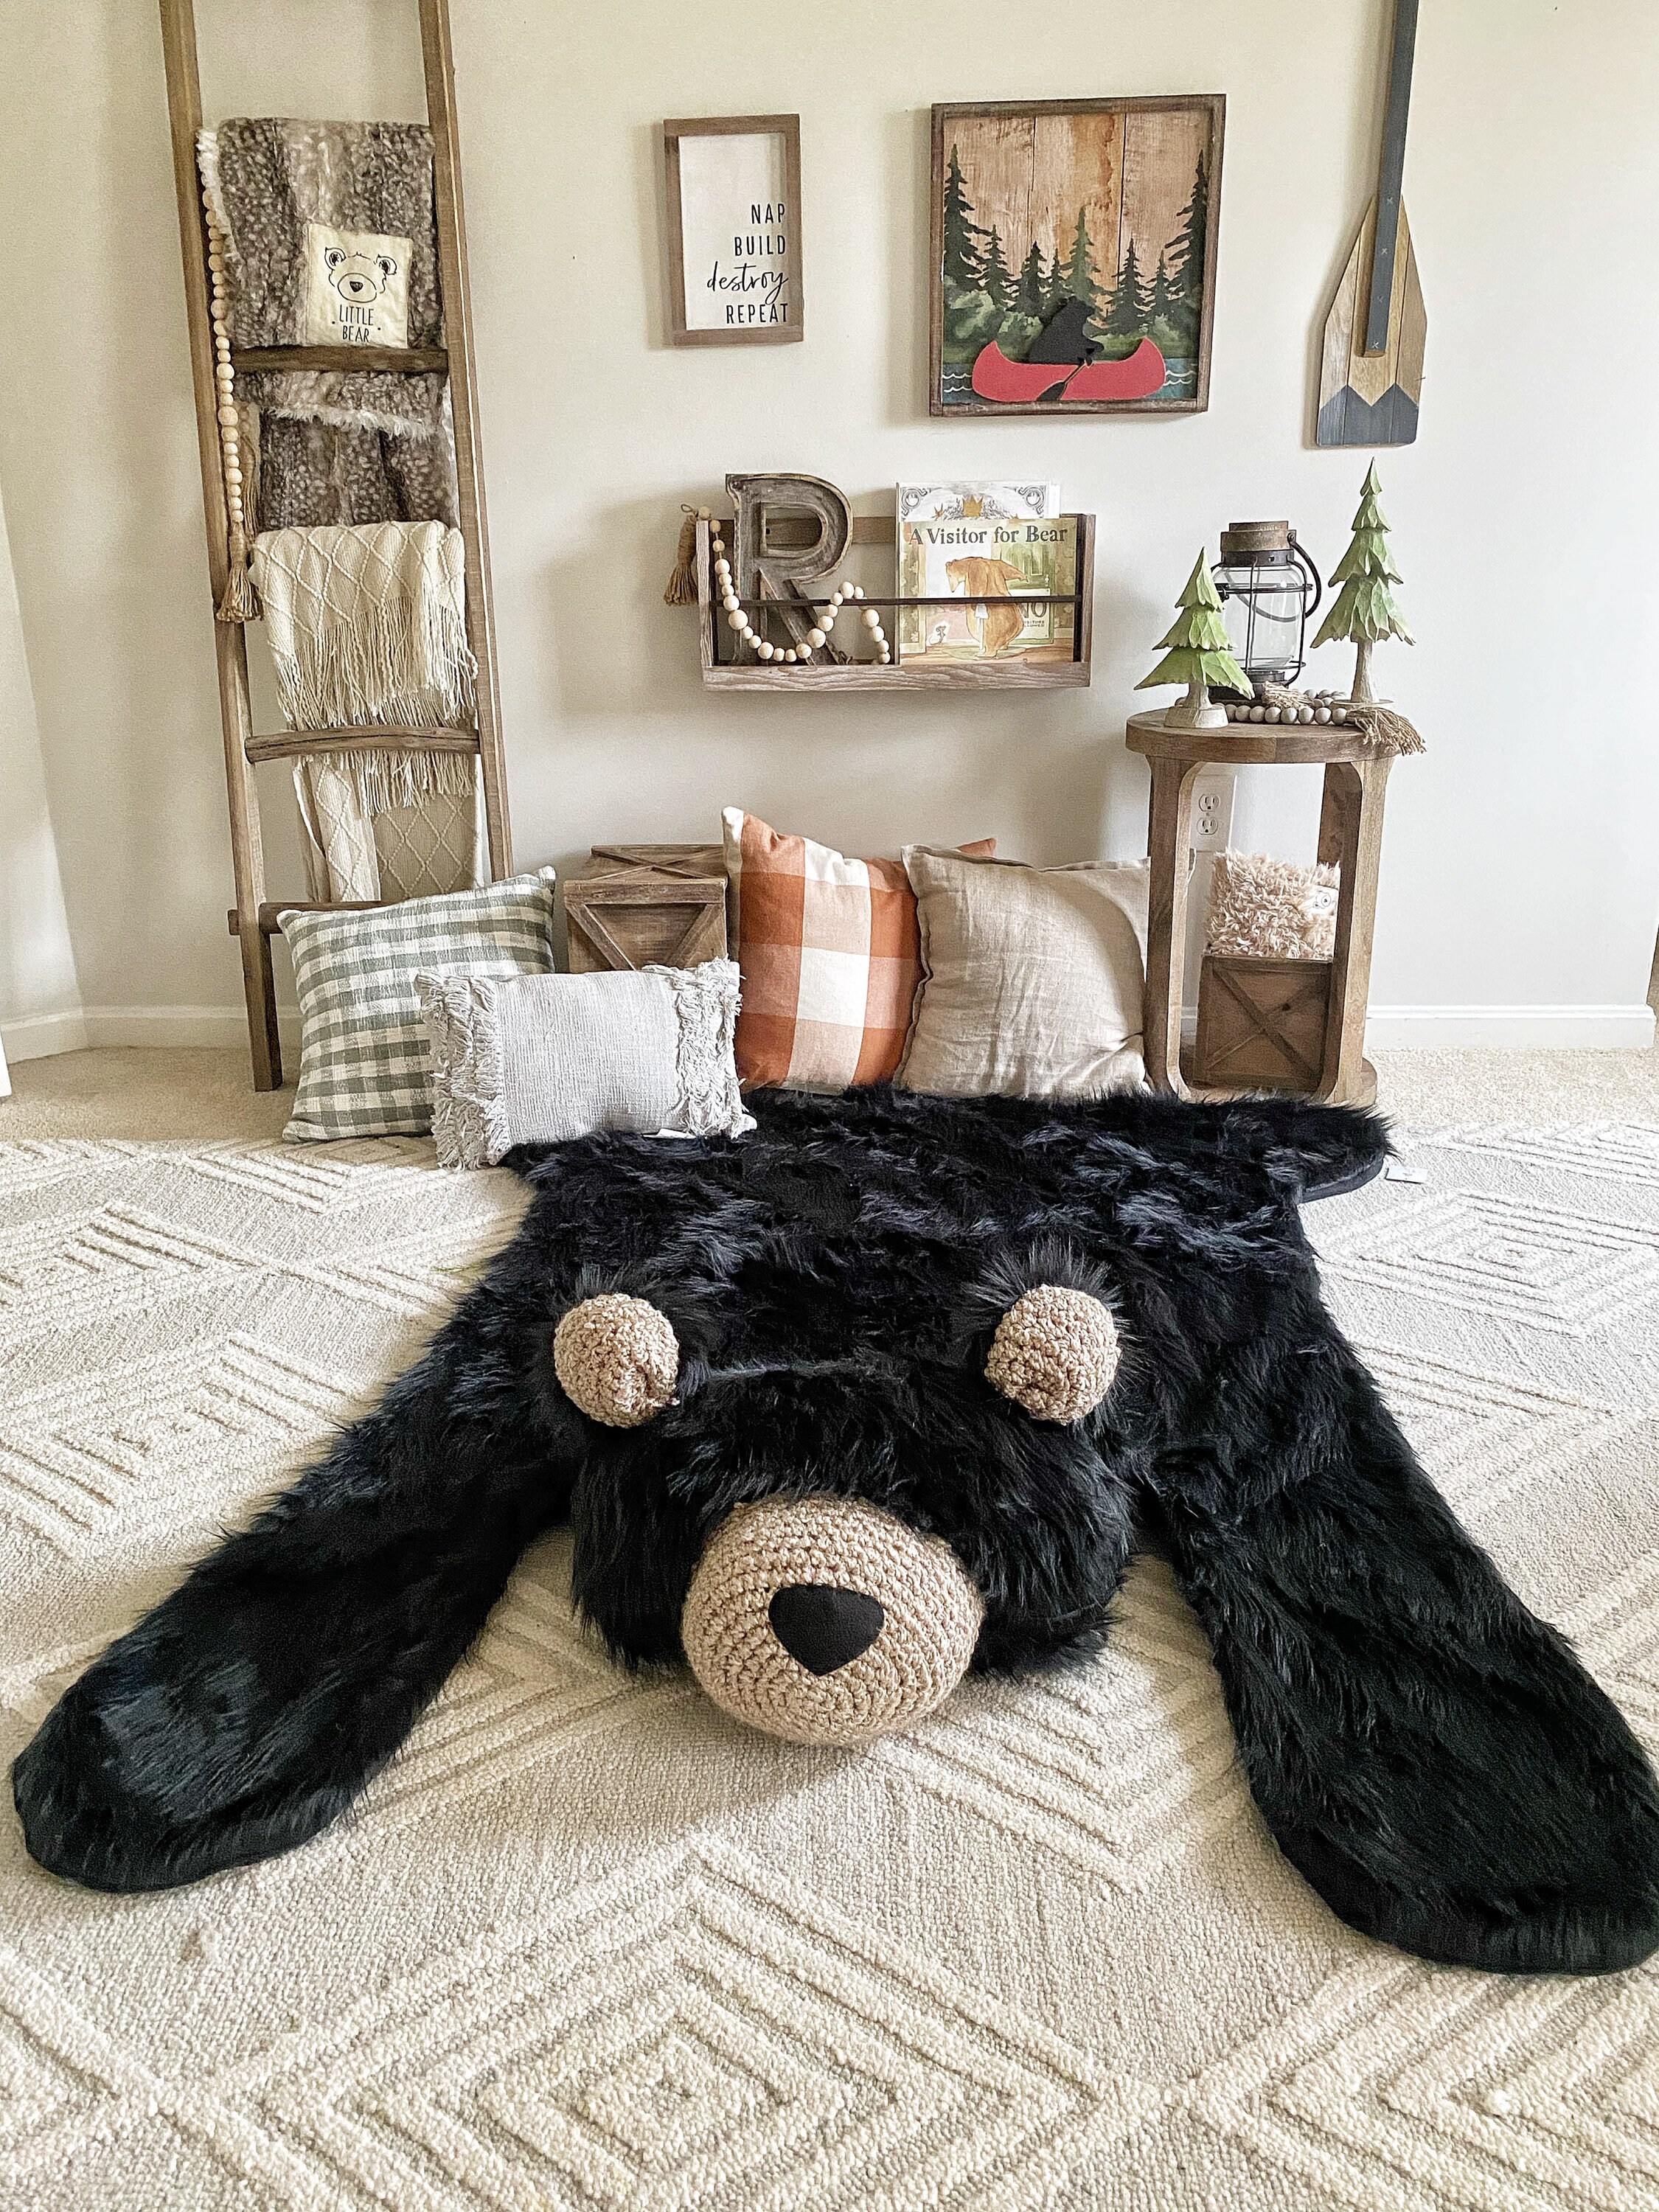 EXTRA LARGE Black Grizzly Bear Rug - Etsy